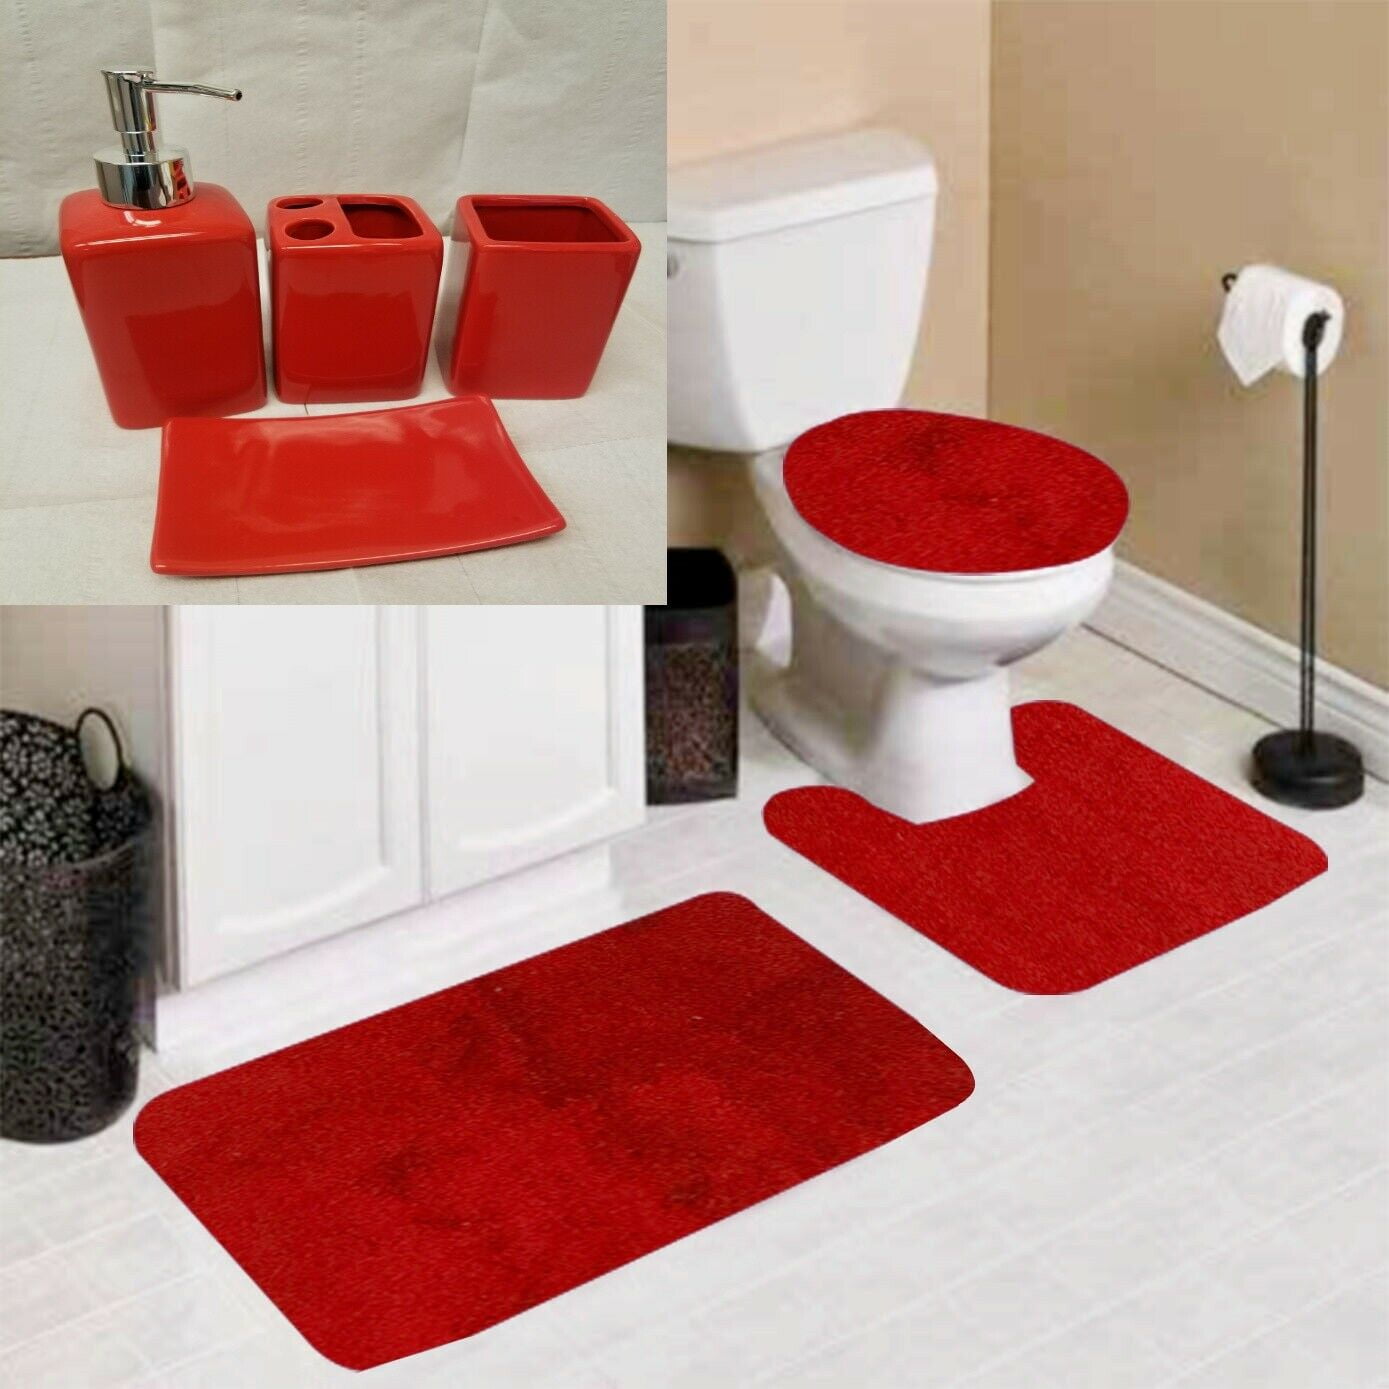 Fancy Linen 3pc Non-Slip Bath Mat Set with Rectangle Pattern Solid Hunter Green Bathroom U-Shaped Contour Rug Mat and Toilet Lid Cover New # Bath 66